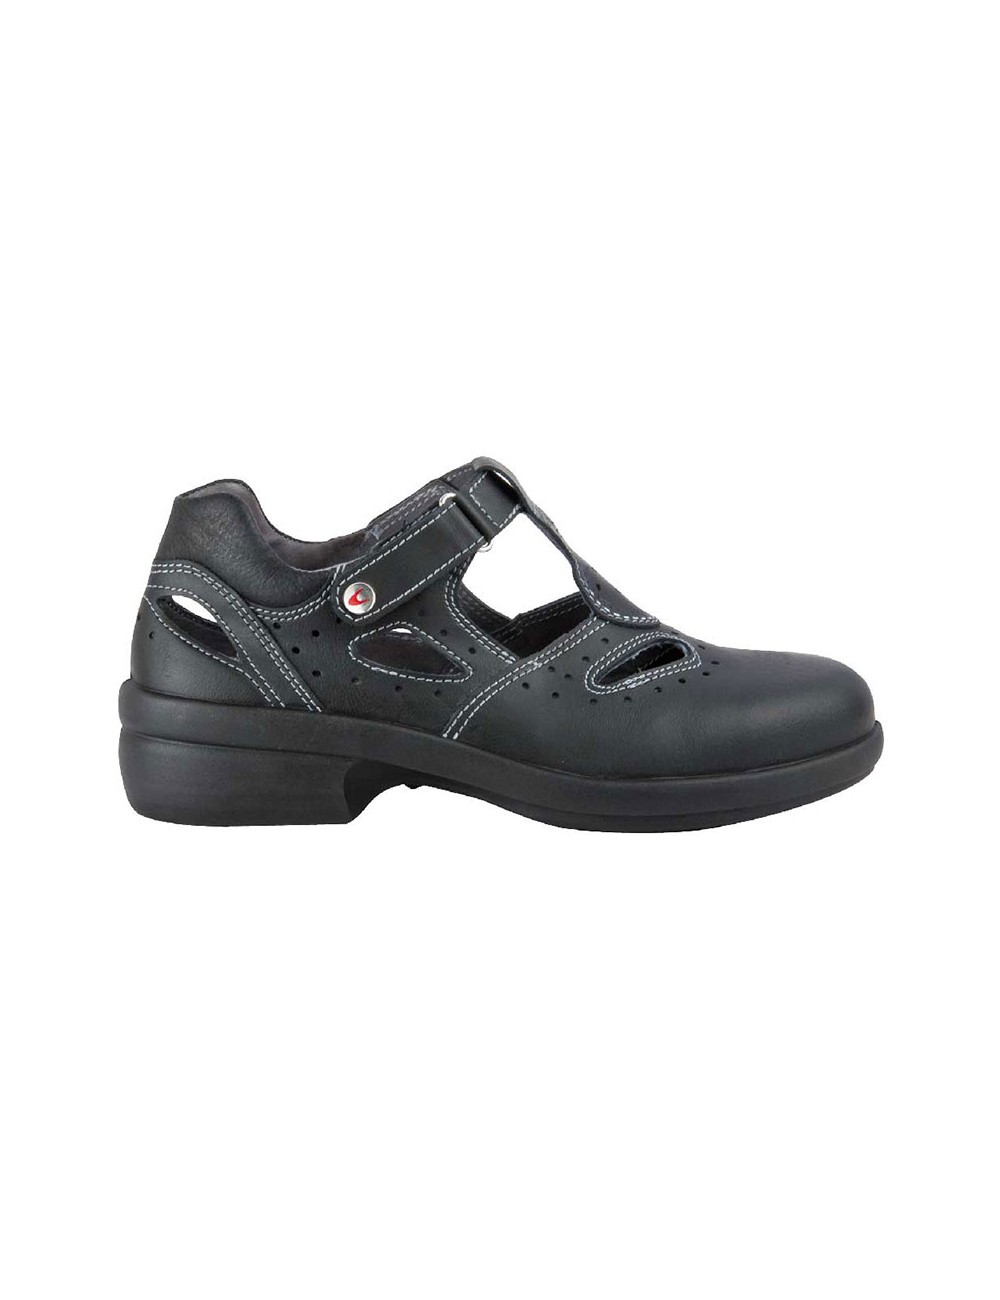 WOMEN'S SUMMER SAFETY SHOES...